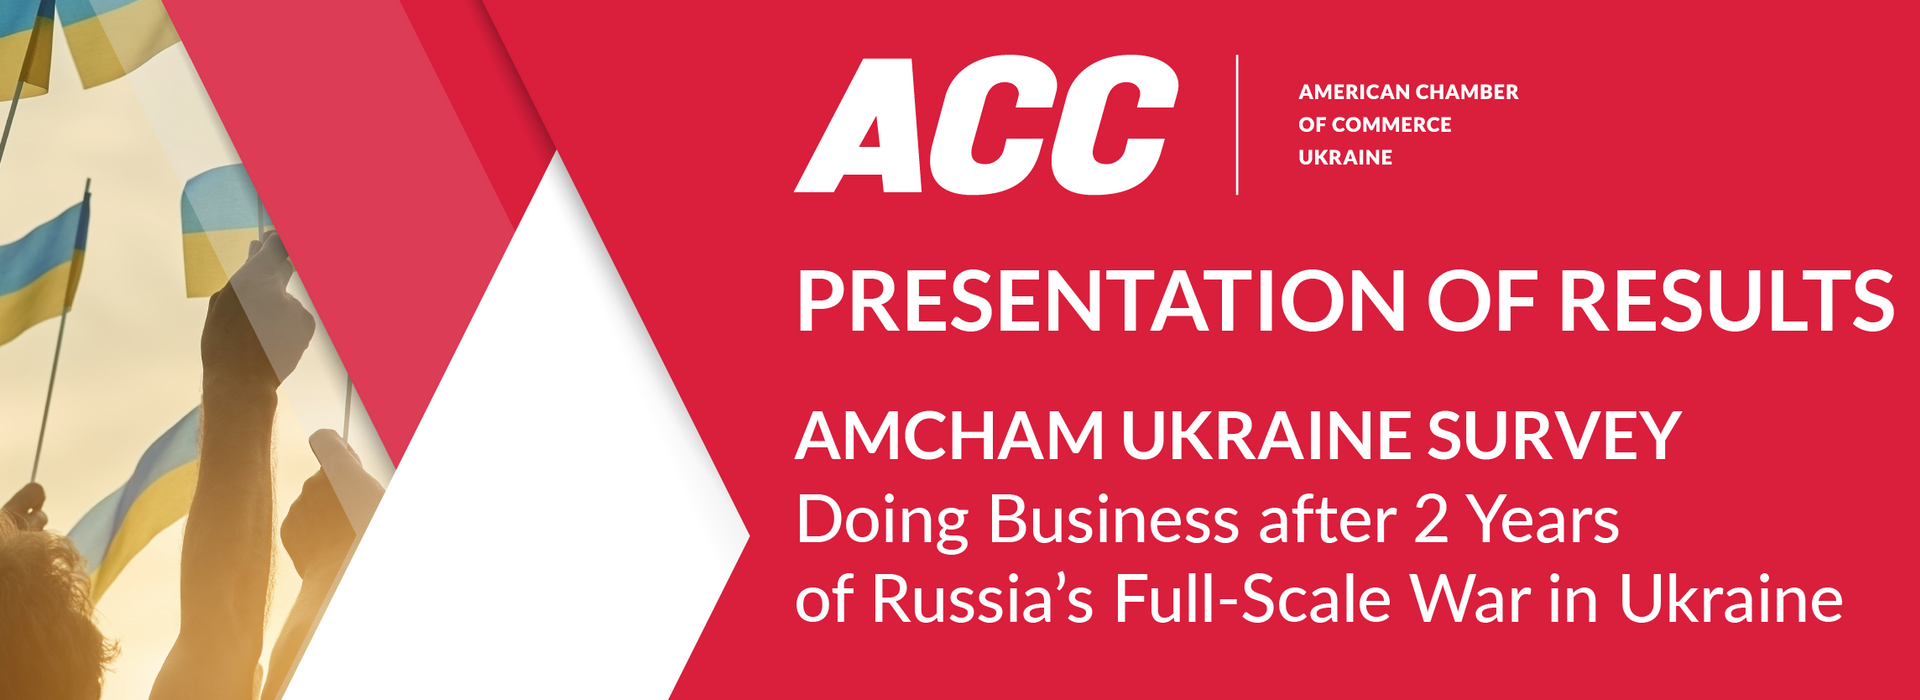 AmCham Survey Results: Doing Business after 2 Years of Russia’s Full-Scale War in Ukraine